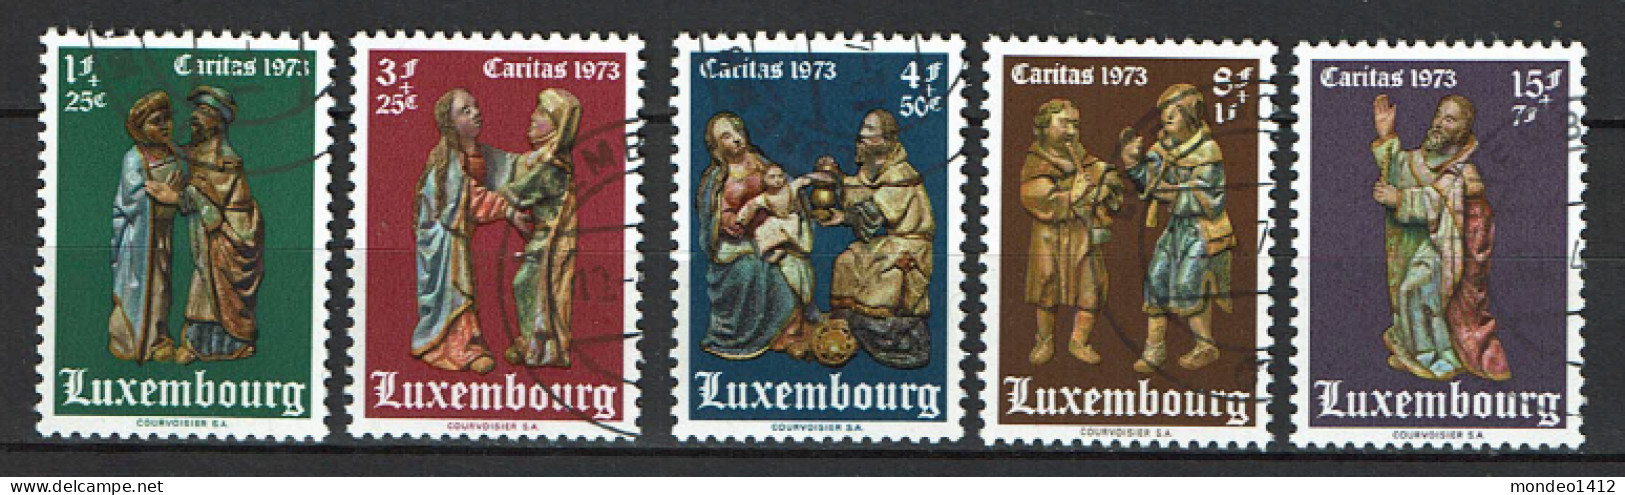 Luxembourg 1973 - YT 821/825 - Religious Statuettes - Charity Issue - Used Stamps